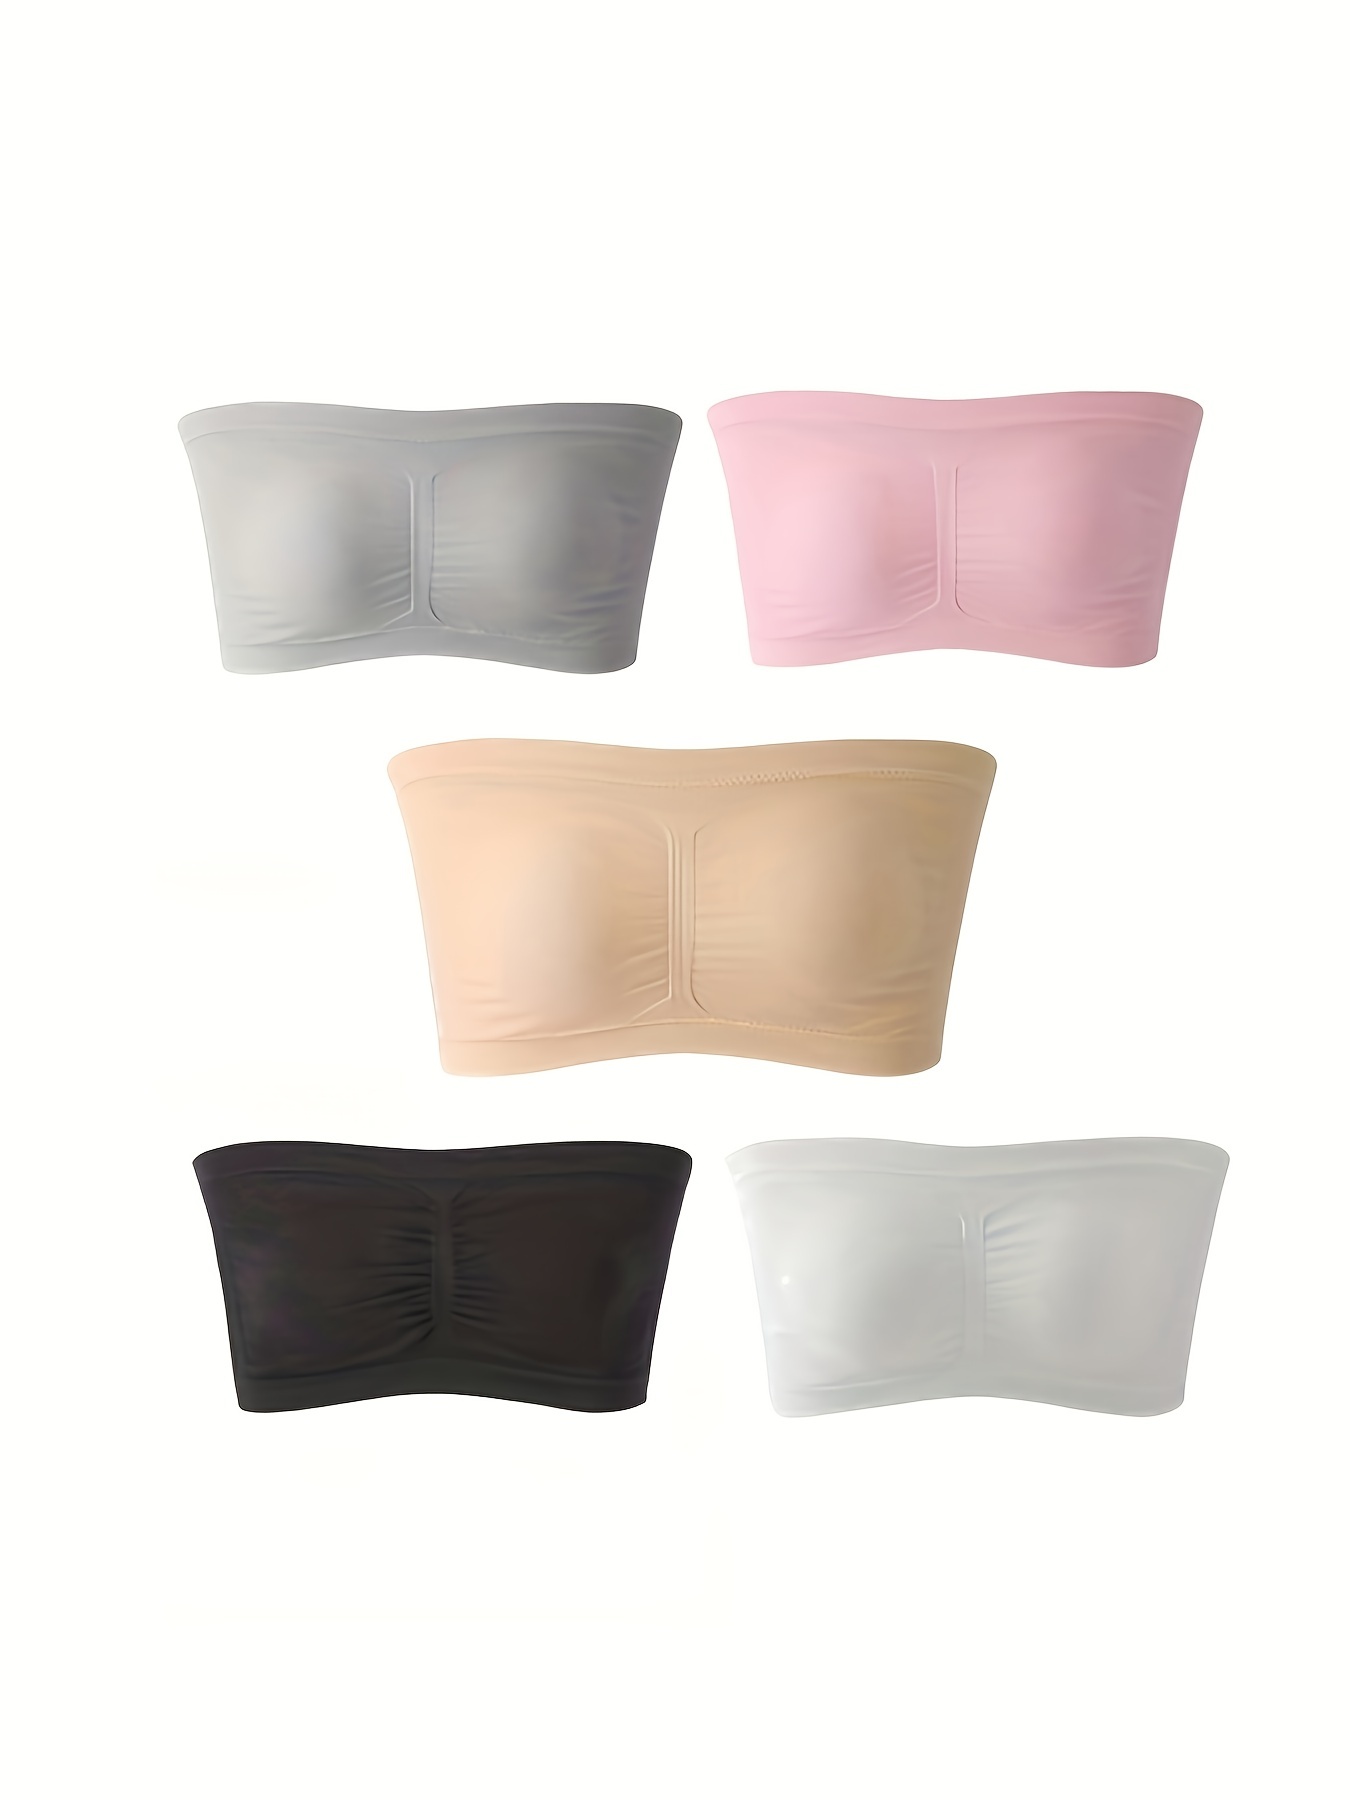 Womens Sexy Strapless Bra Removable Pads Bandeau Tube Top Seamless